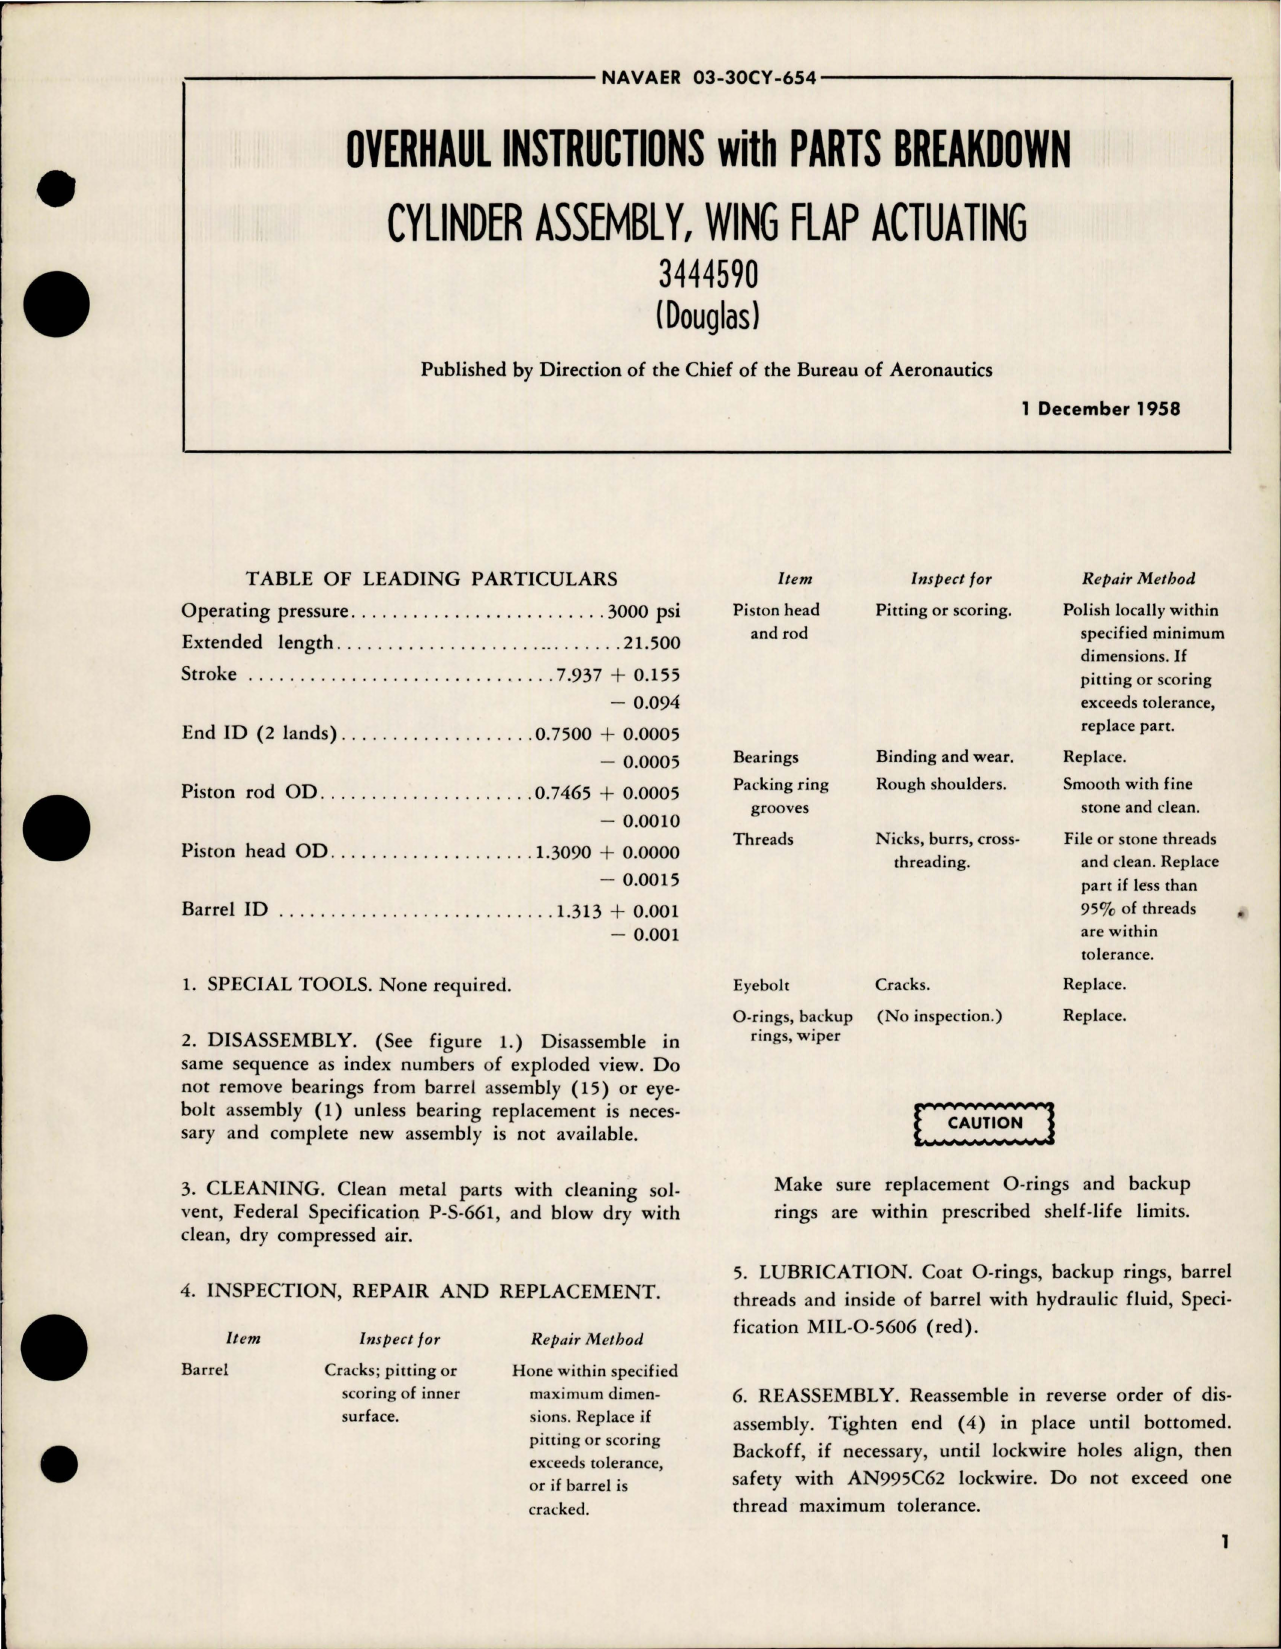 Sample page 1 from AirCorps Library document: Overhaul Instructions with Parts Breakdown for Wing Flap Actuating Cylinder Assembly - 3444590